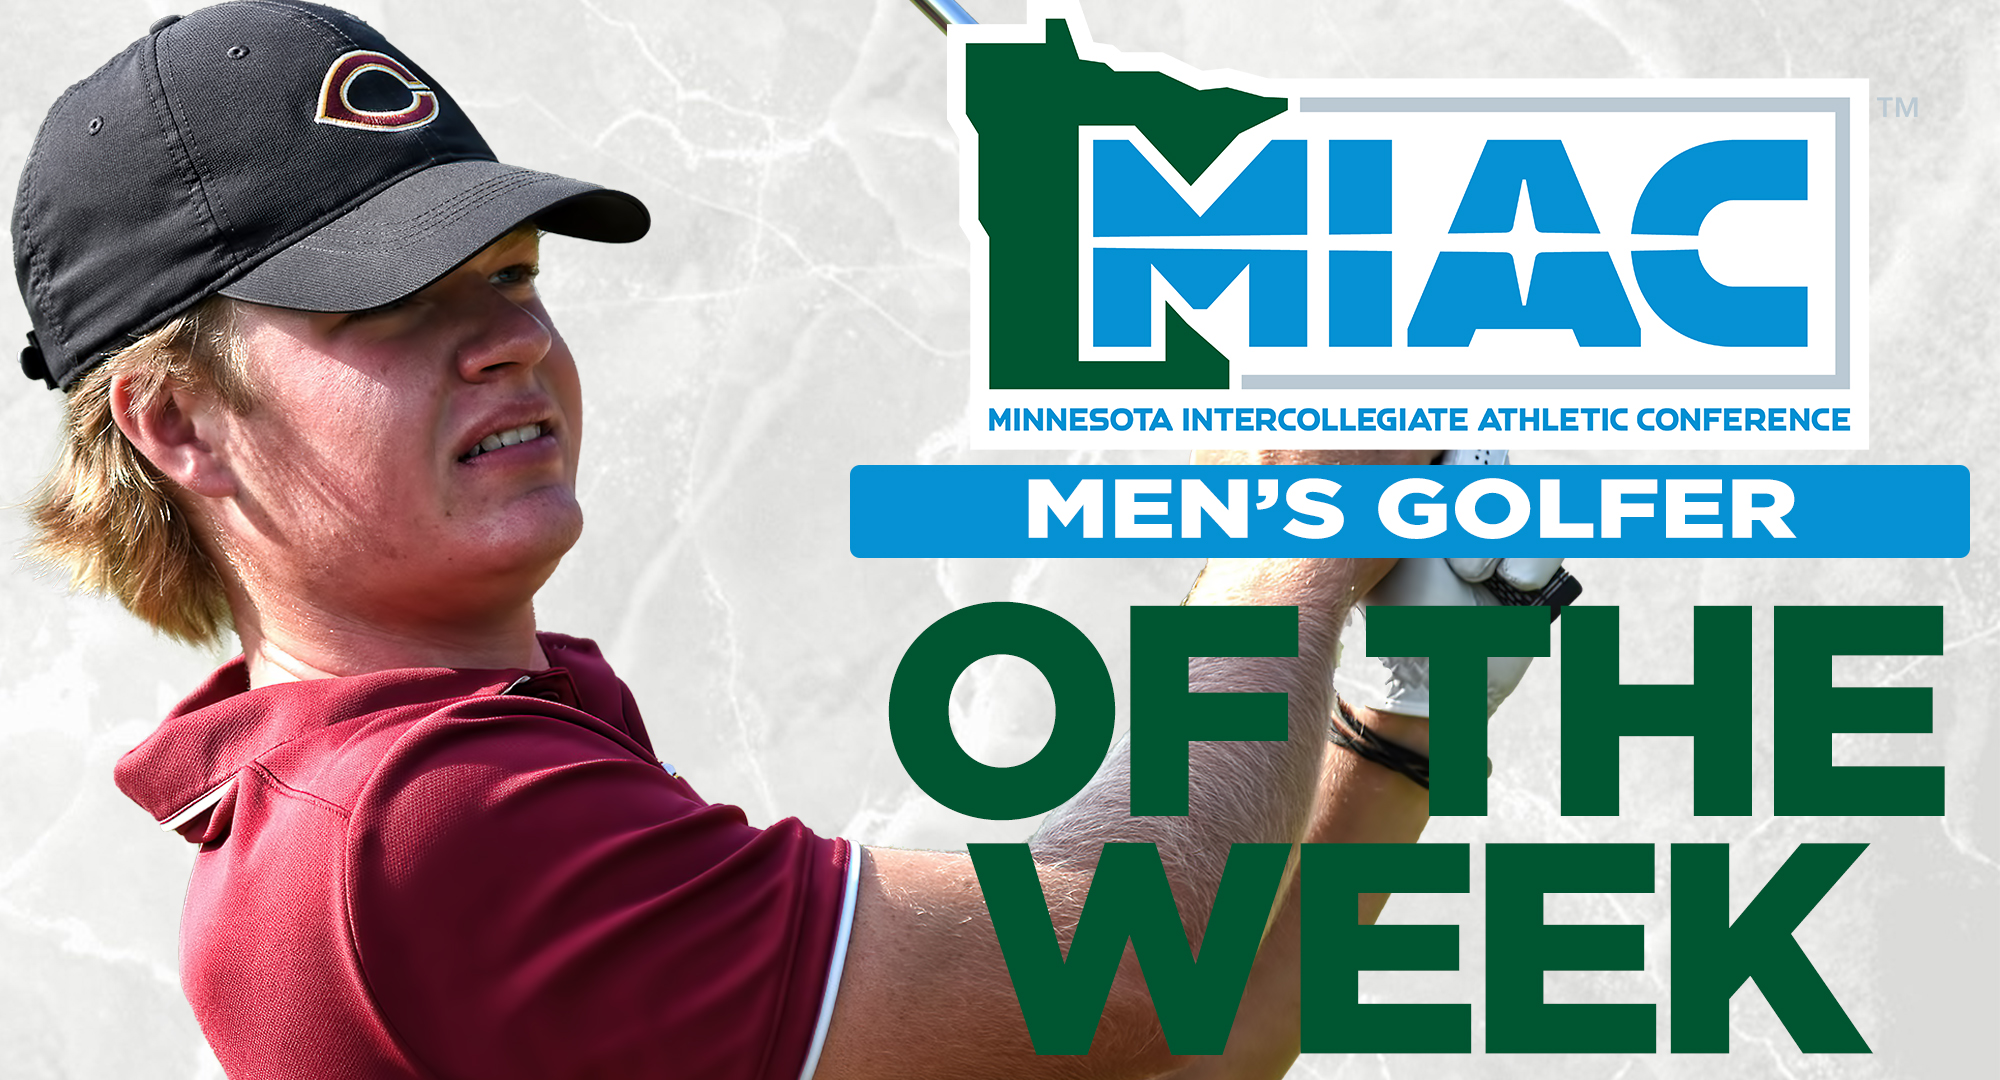 Gabe Benson was named the MIAC Men’s Golfer of the Week following his record-tying, season-opening win at the Augsburg Invitational.